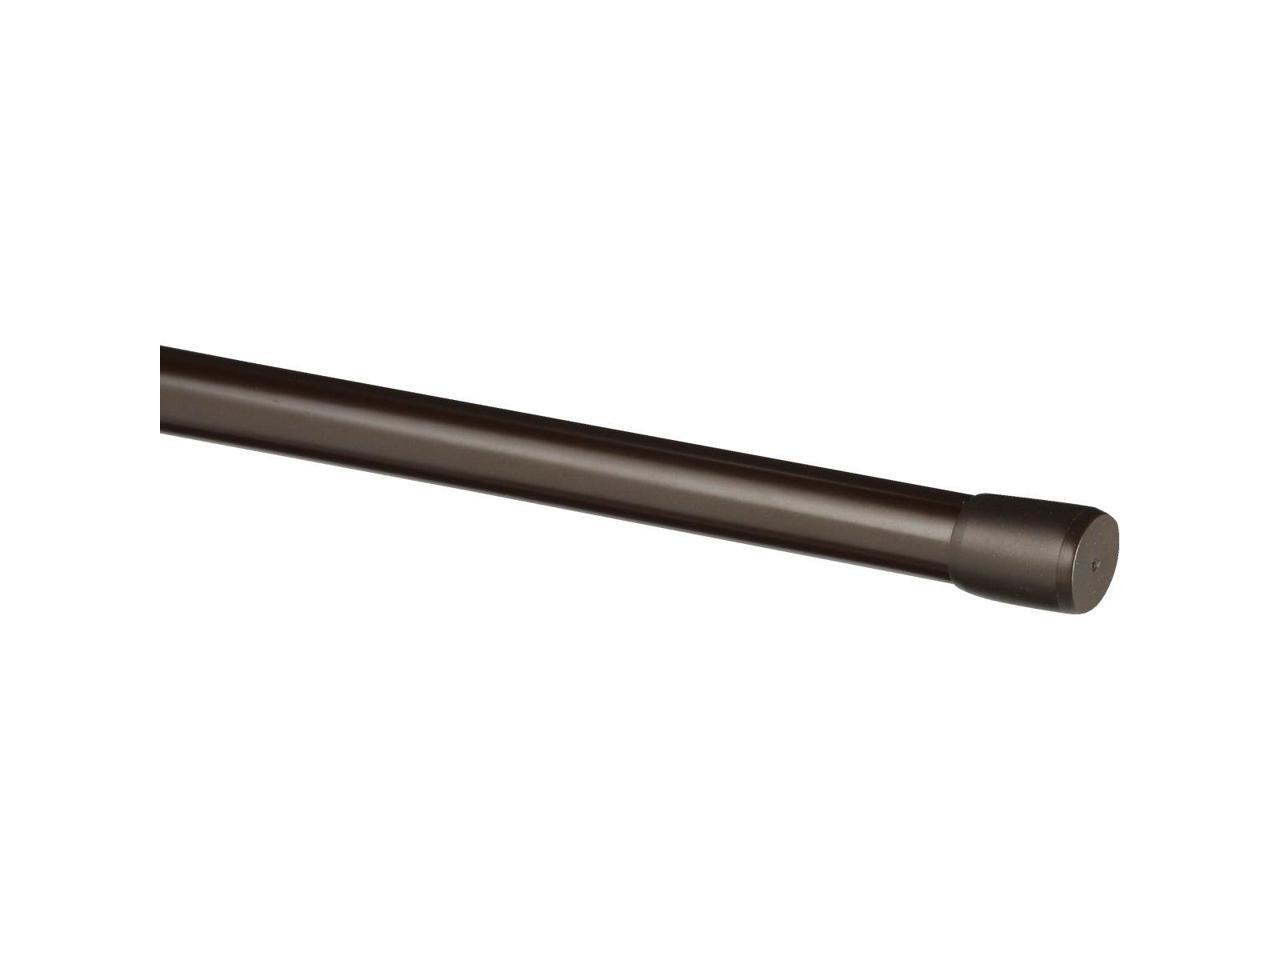 Kenney Kn620 Carlisle Tension Rod Brown 28 to 48 Inch for sale online 